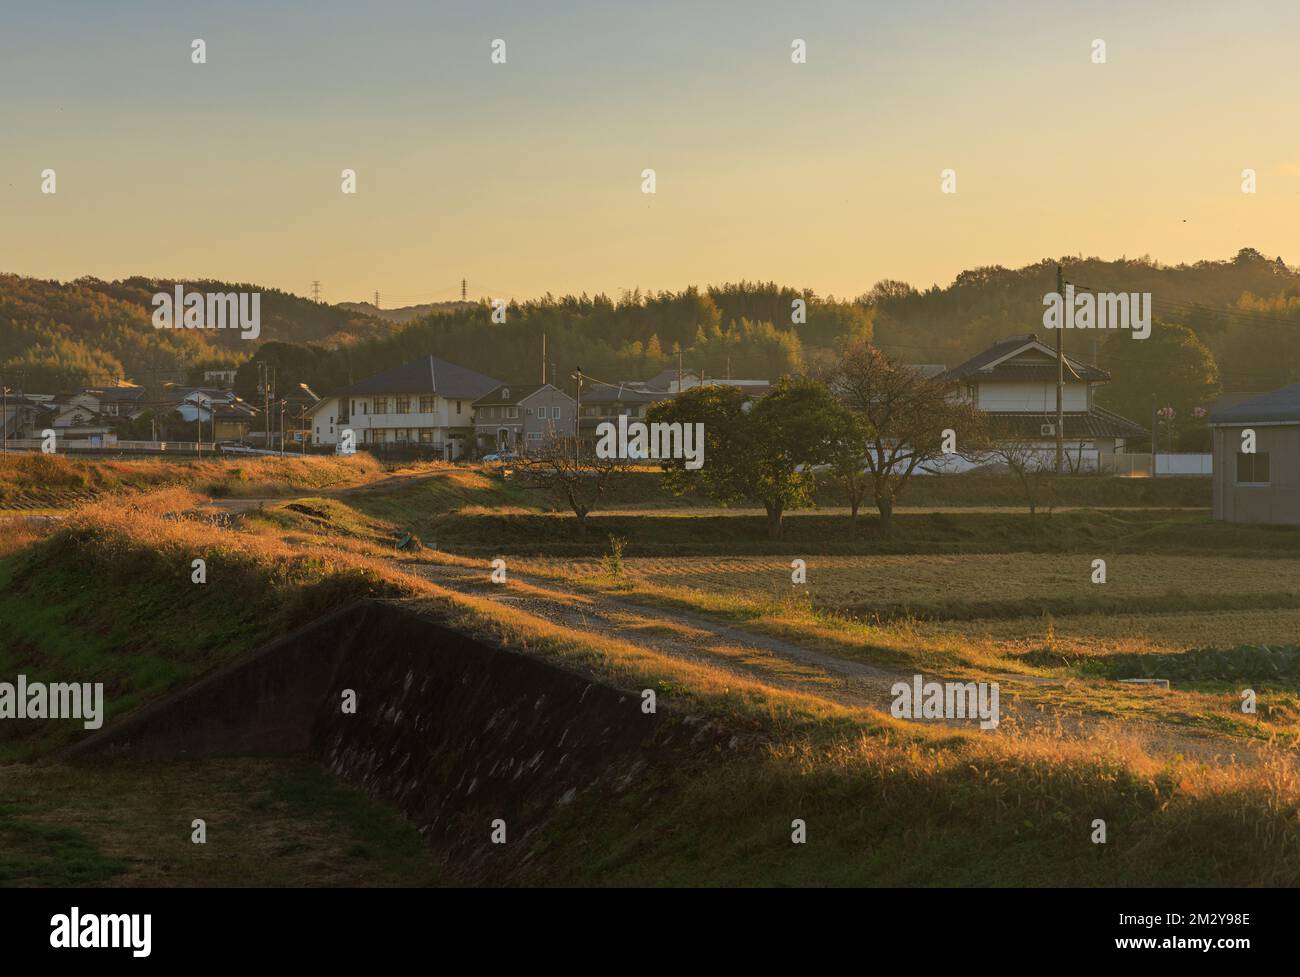 Early morning light hits dirt road through small Japanese town Stock Photo